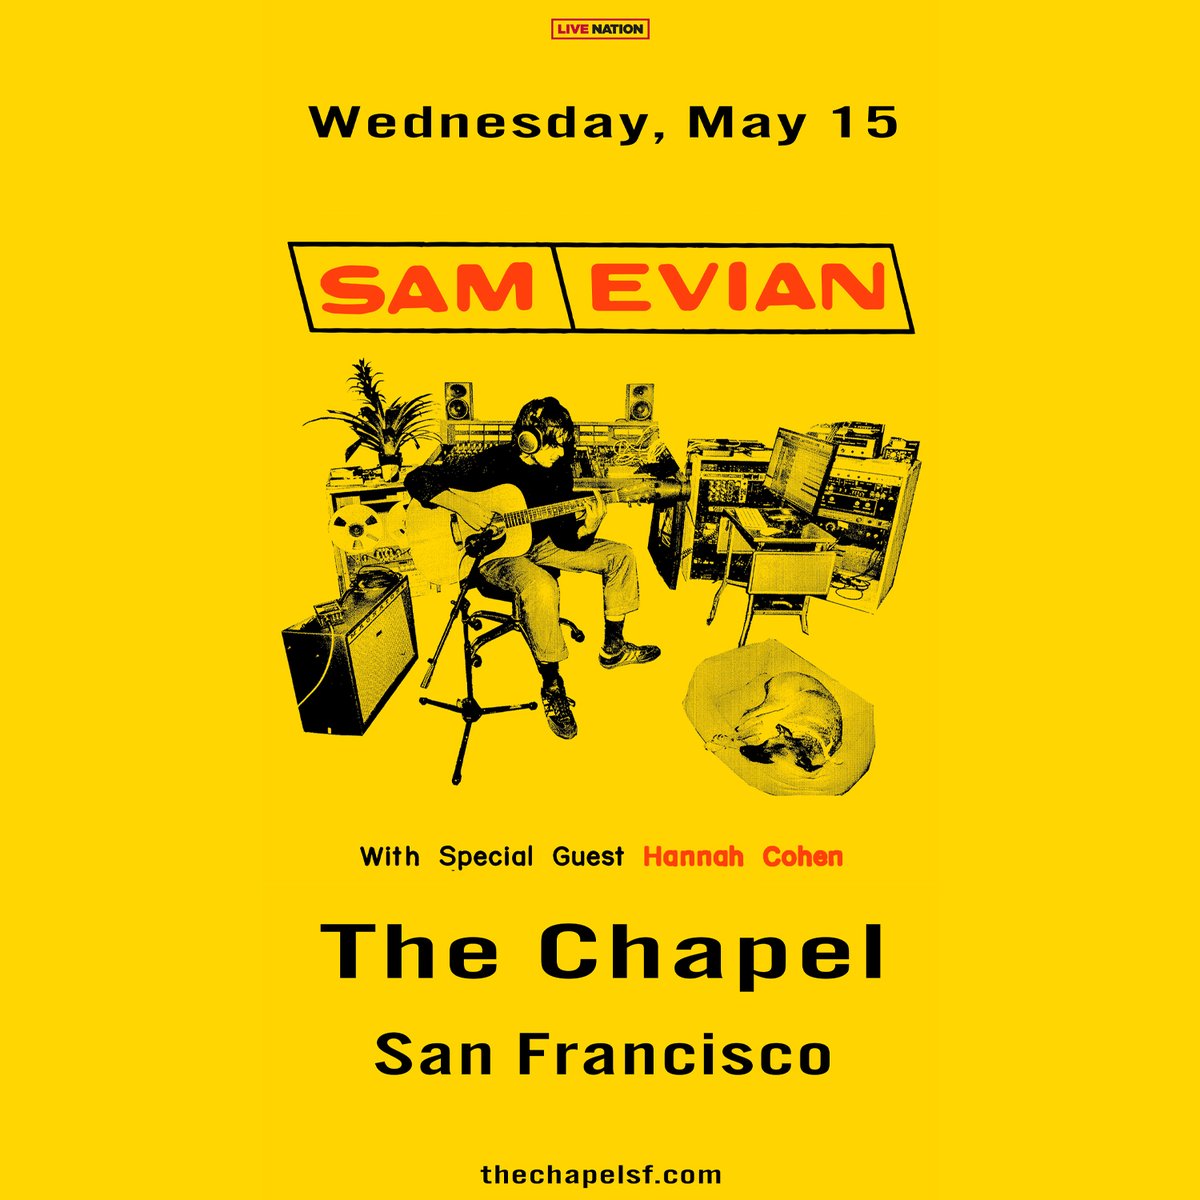 Tix are going fast for tonight's show (Wed. 5/15) with Sam Evian + Hannah Cohen! Be sure to get yours soon: tinyurl.com/8af8as9n